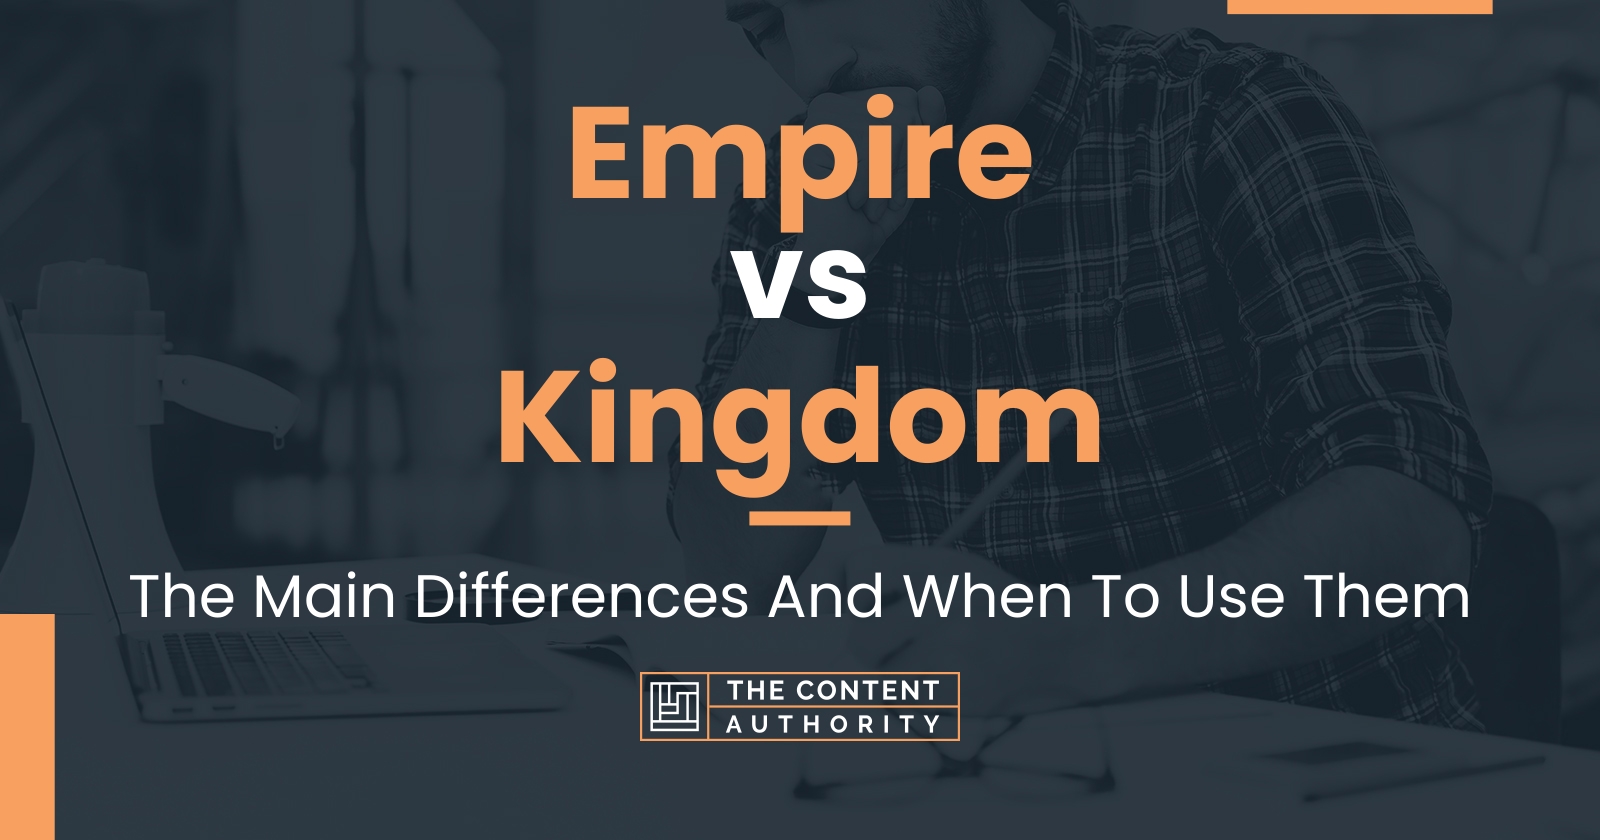 Empire vs Kingdom: The Main Differences And When To Use Them